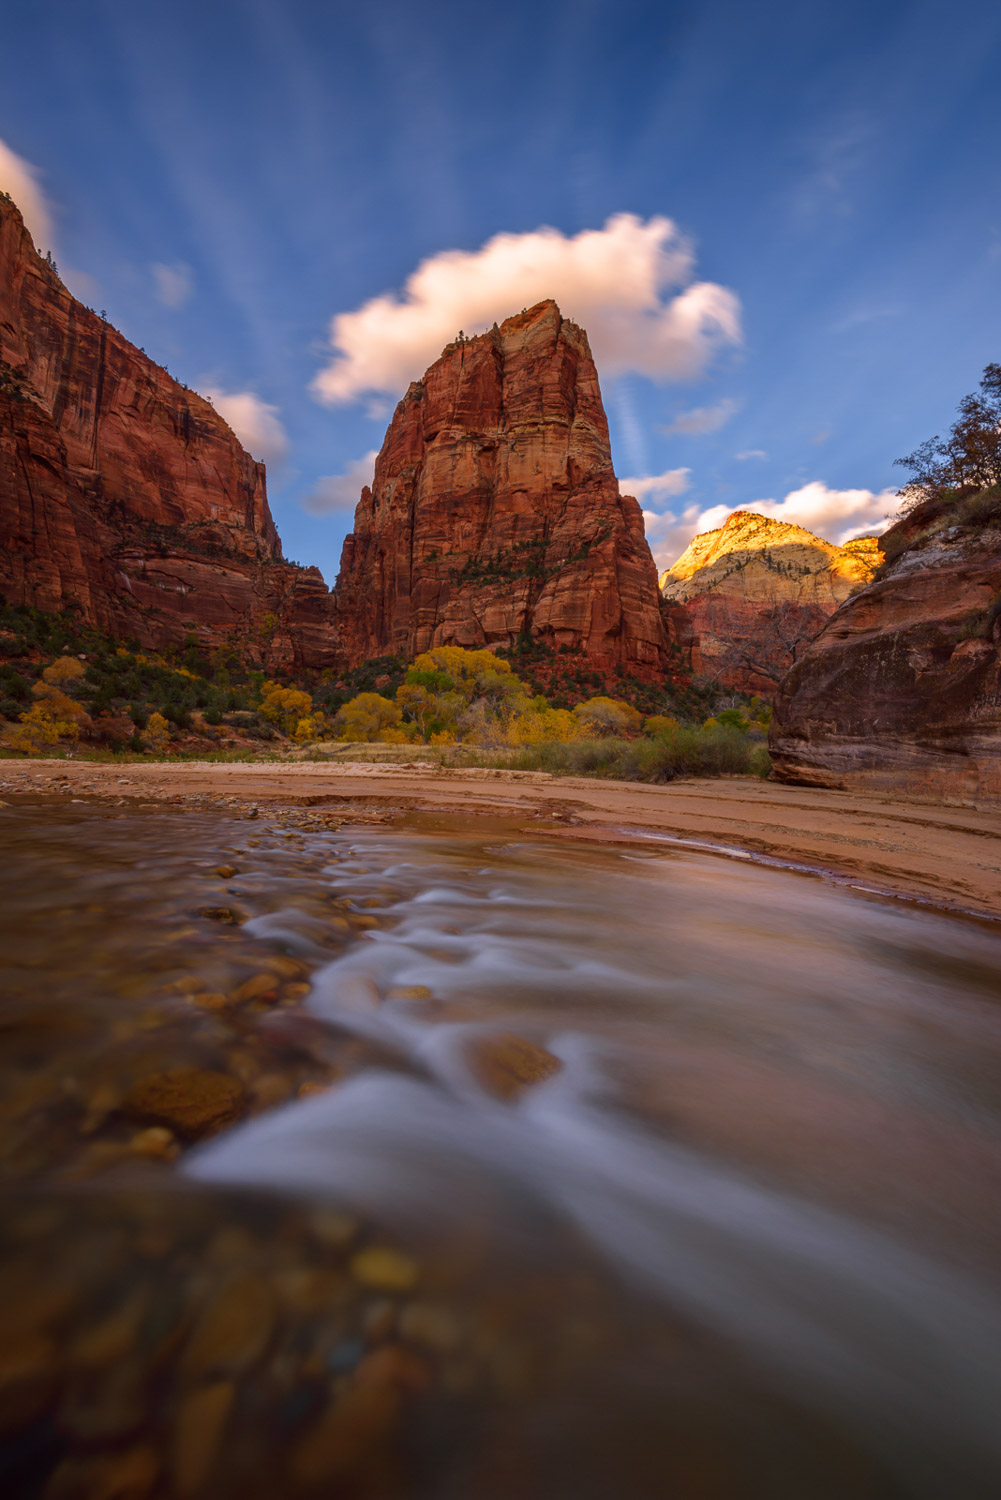 Angels Landing at sunset captured from the Virgin River in Zion National Park.